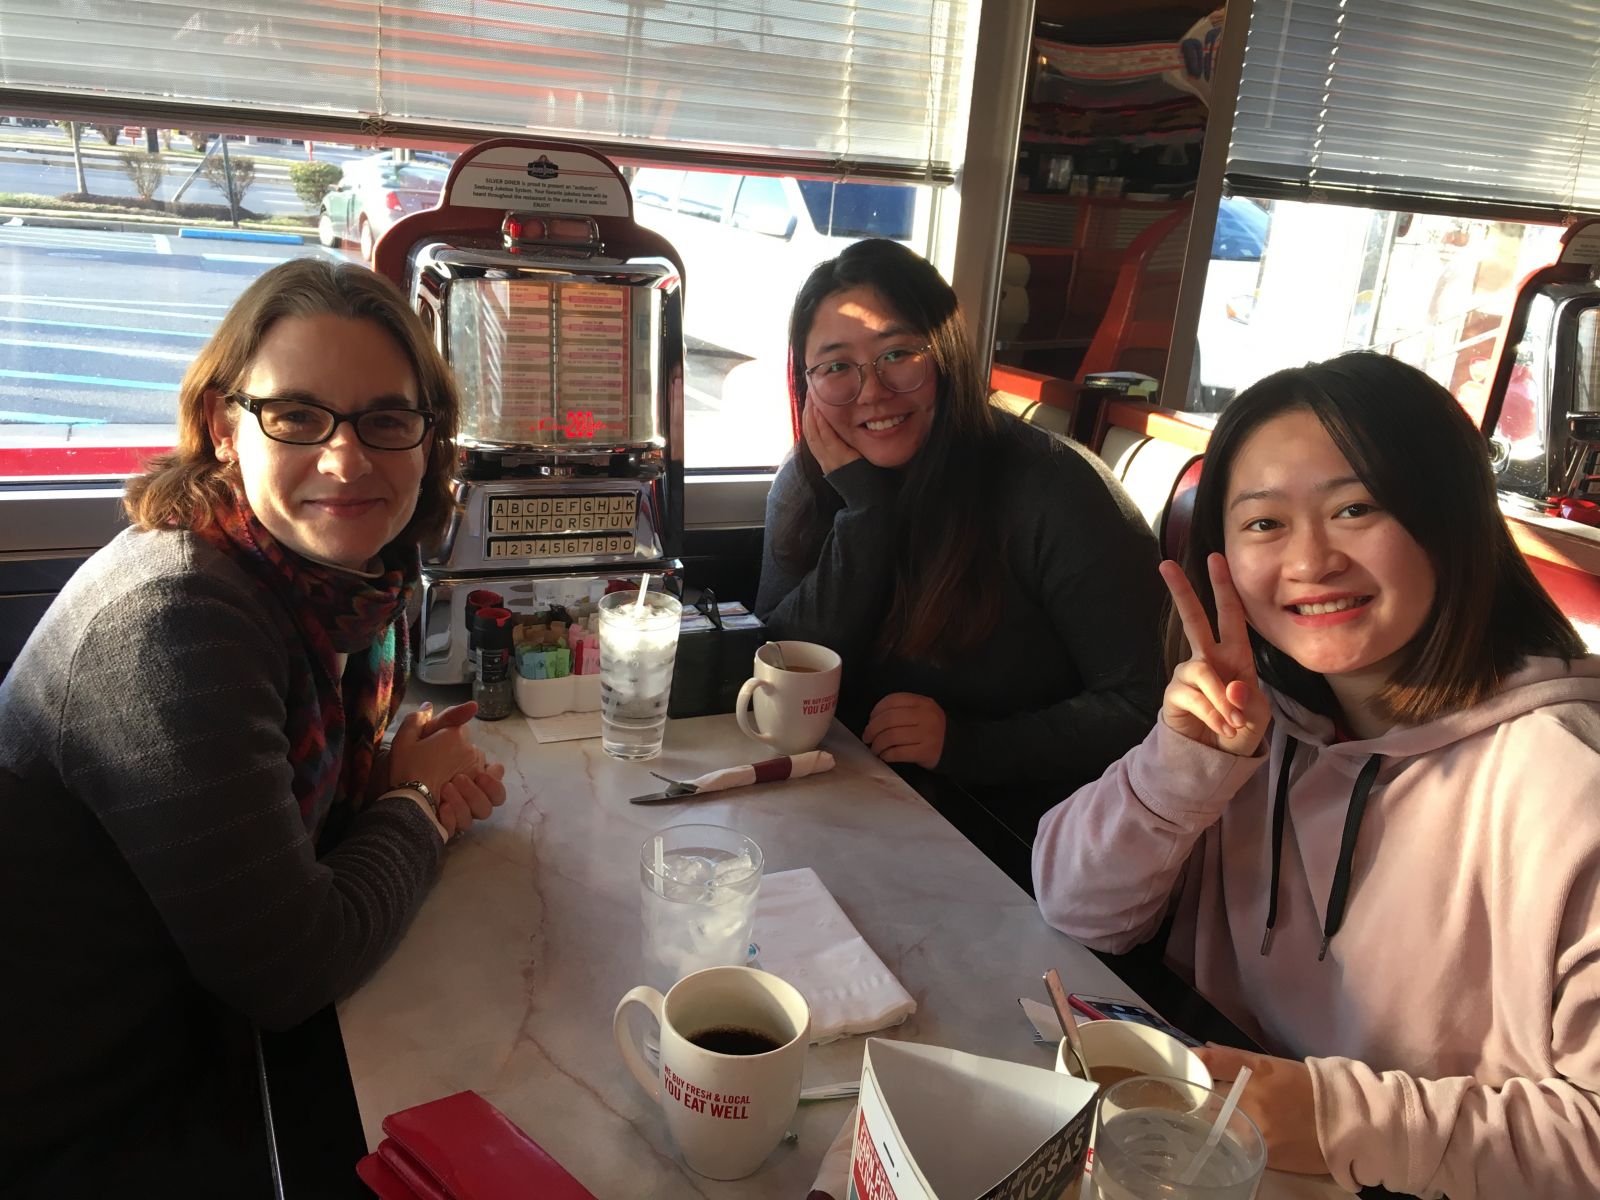 Stage management students from National Academy of Chinese Theatre Arts finish up internship at UMD TDPS